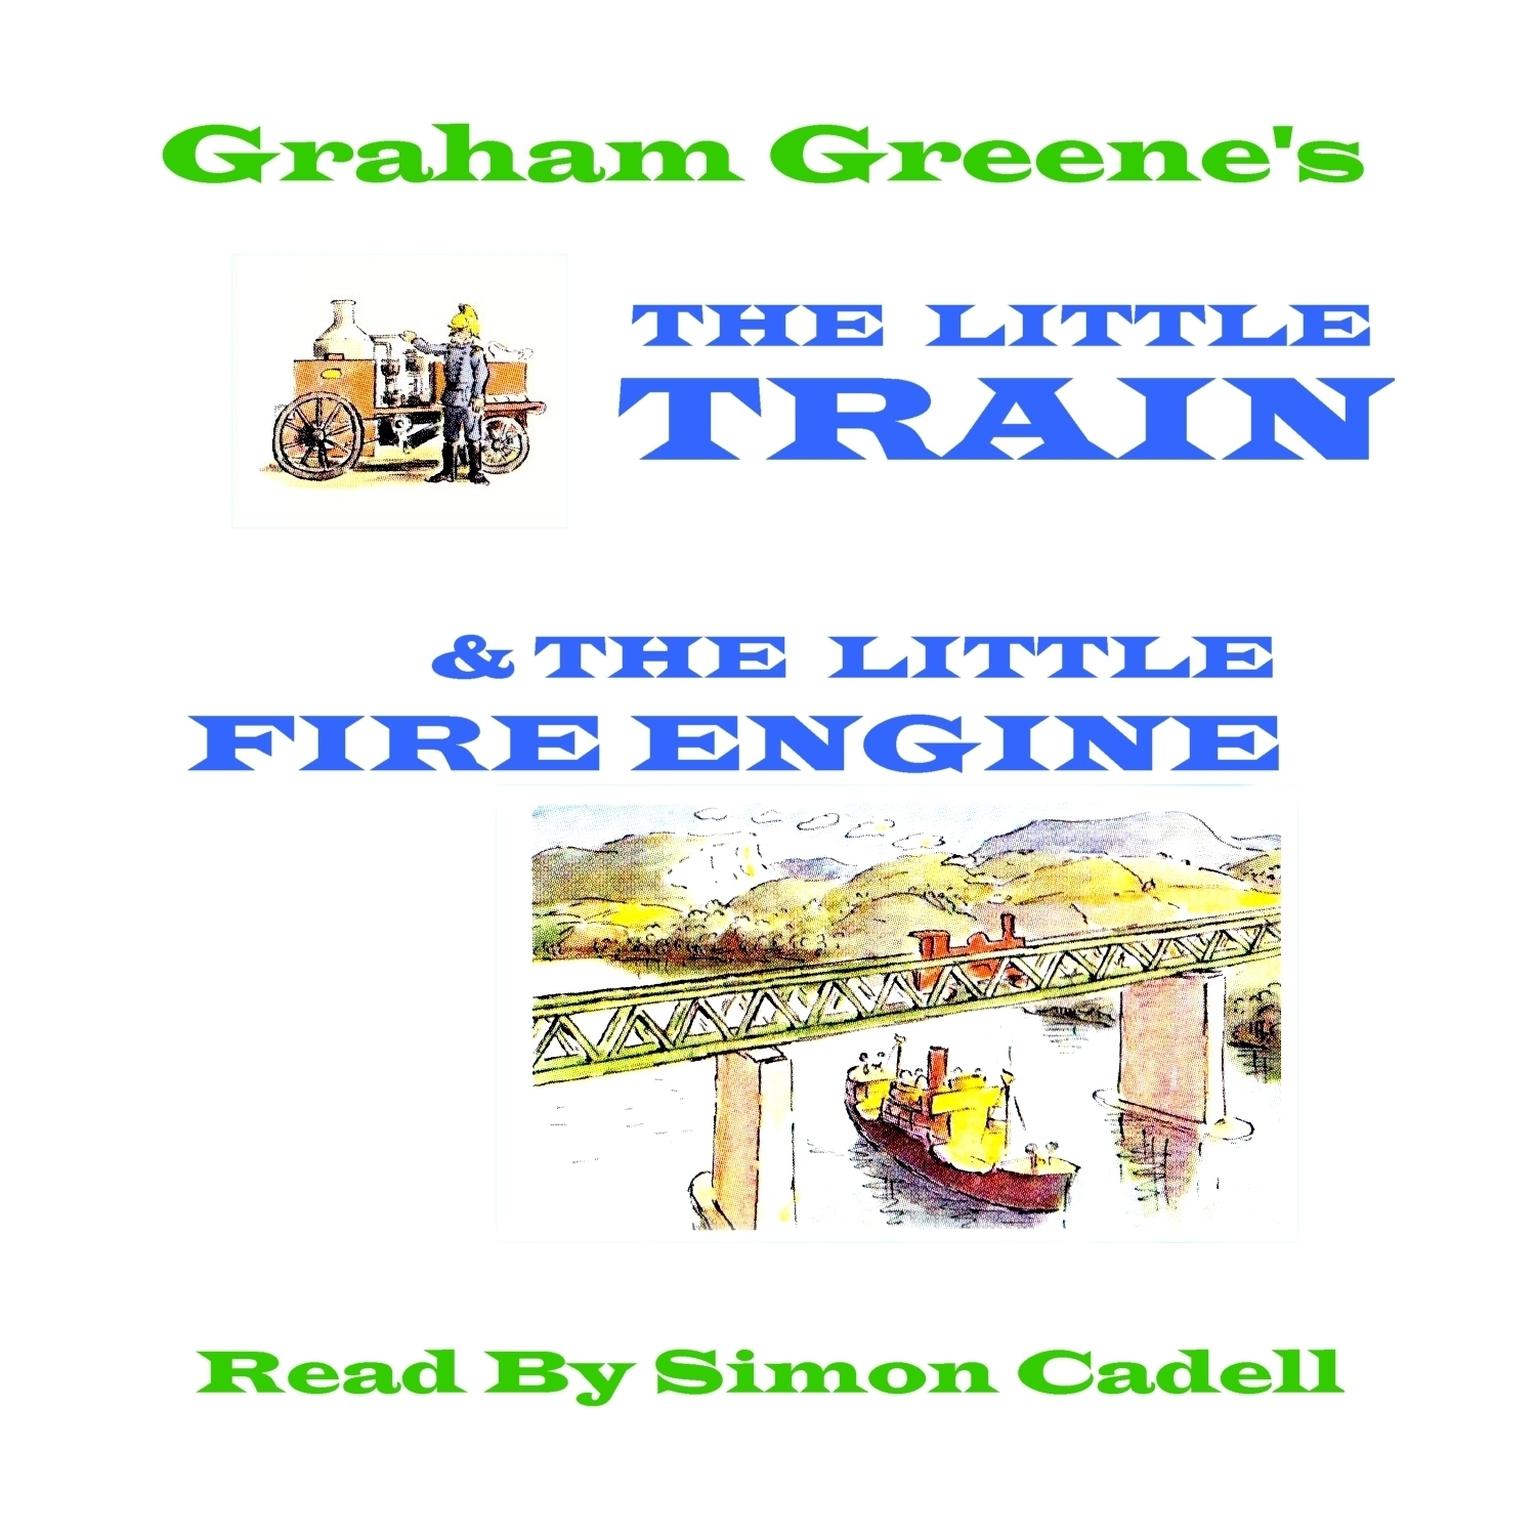 The Little Fire Engine & The Little Train Audiobook, by Graham Greene